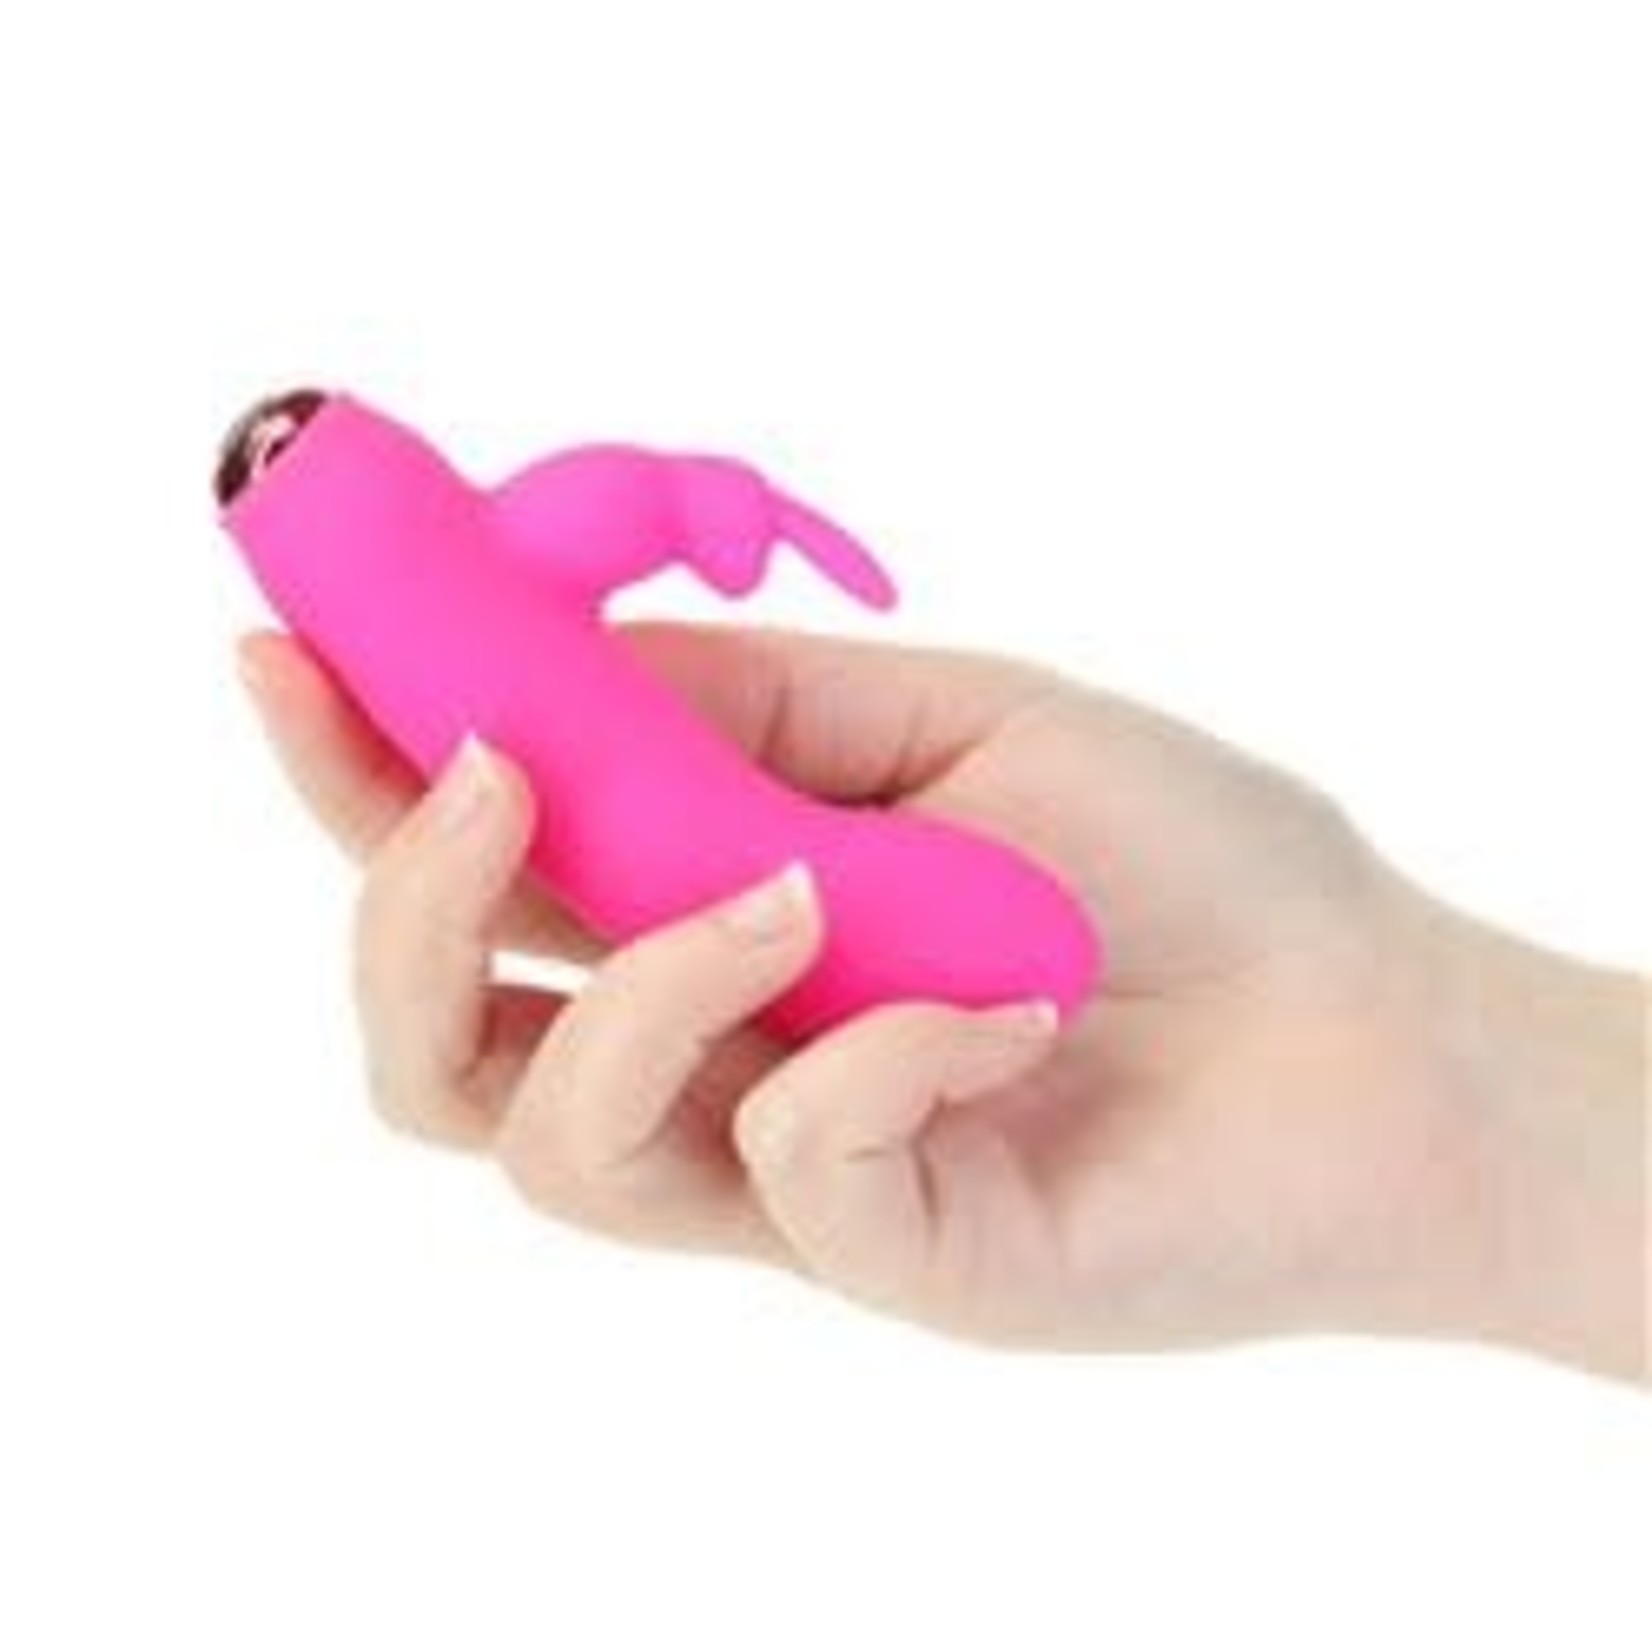 BMS - ALICE'S BUNNY - RECHARGEABLE BULLET WITH REMOVABLE RABBIT SLEEVE - PINK